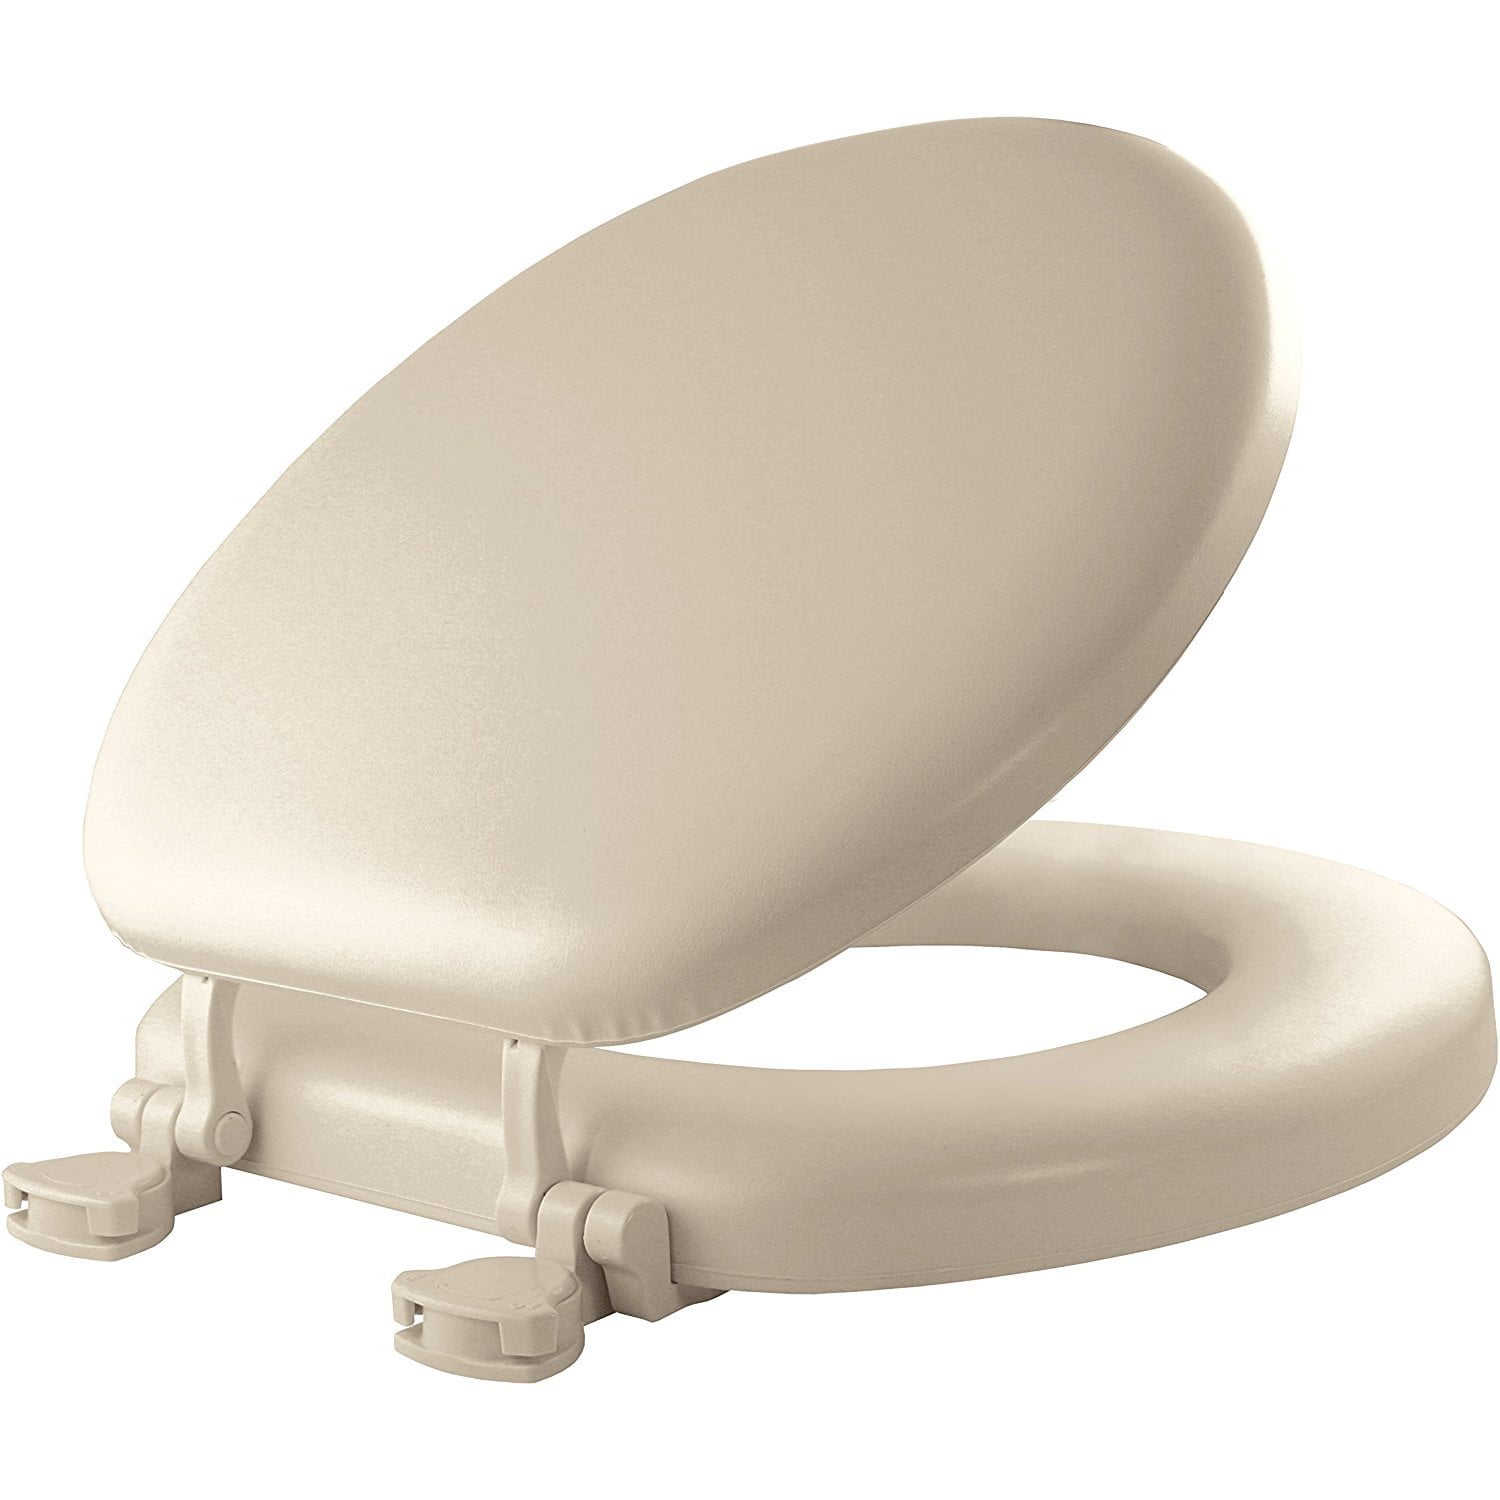  Commode Seat Over Toilet with Simple Decor